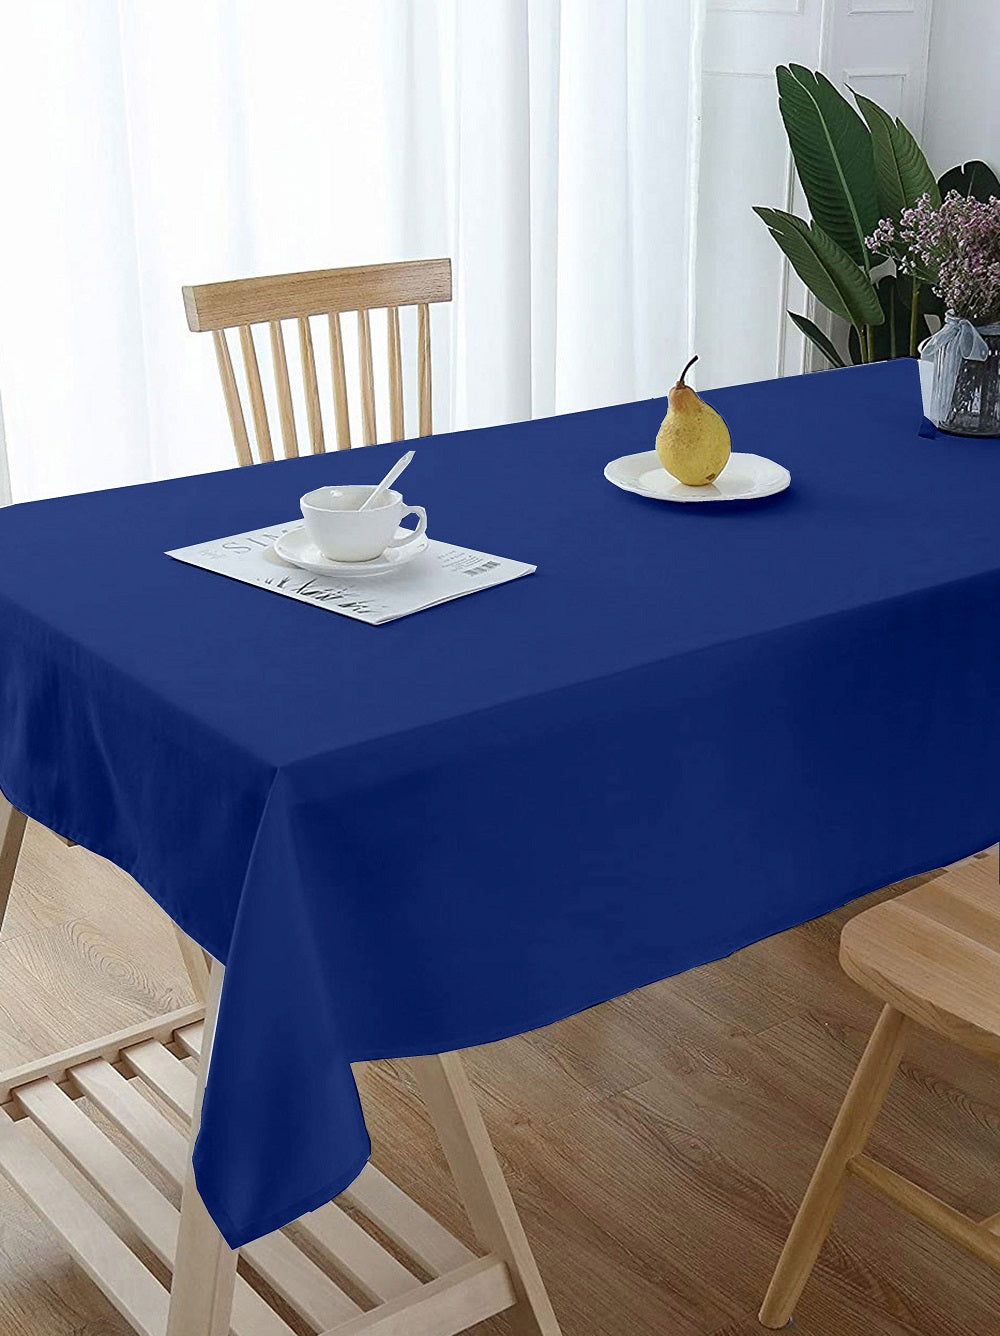 Lushomes dining table cover 6 seater, Ink Blue Classic Plain Dining Table Cover Cloth, table cloth for 6 seater dining table, table cover 6 seater  (Size 60 x 70”, 6 Seater Table Cloth)